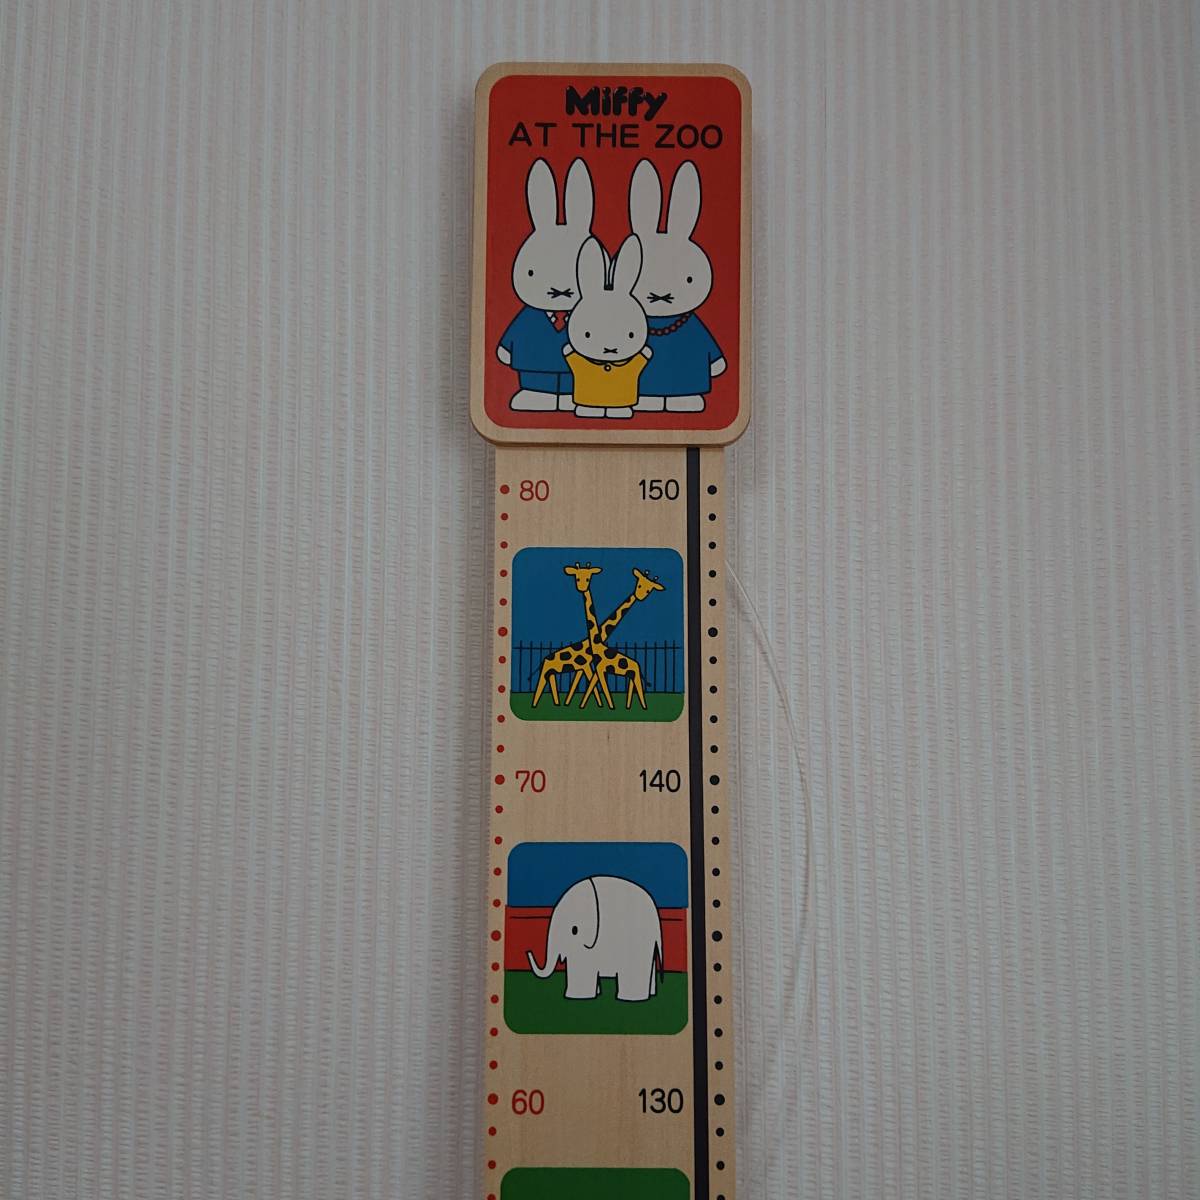  Miffy Miffy at the ZOO ornament height total 0~150. till magnet lack of 